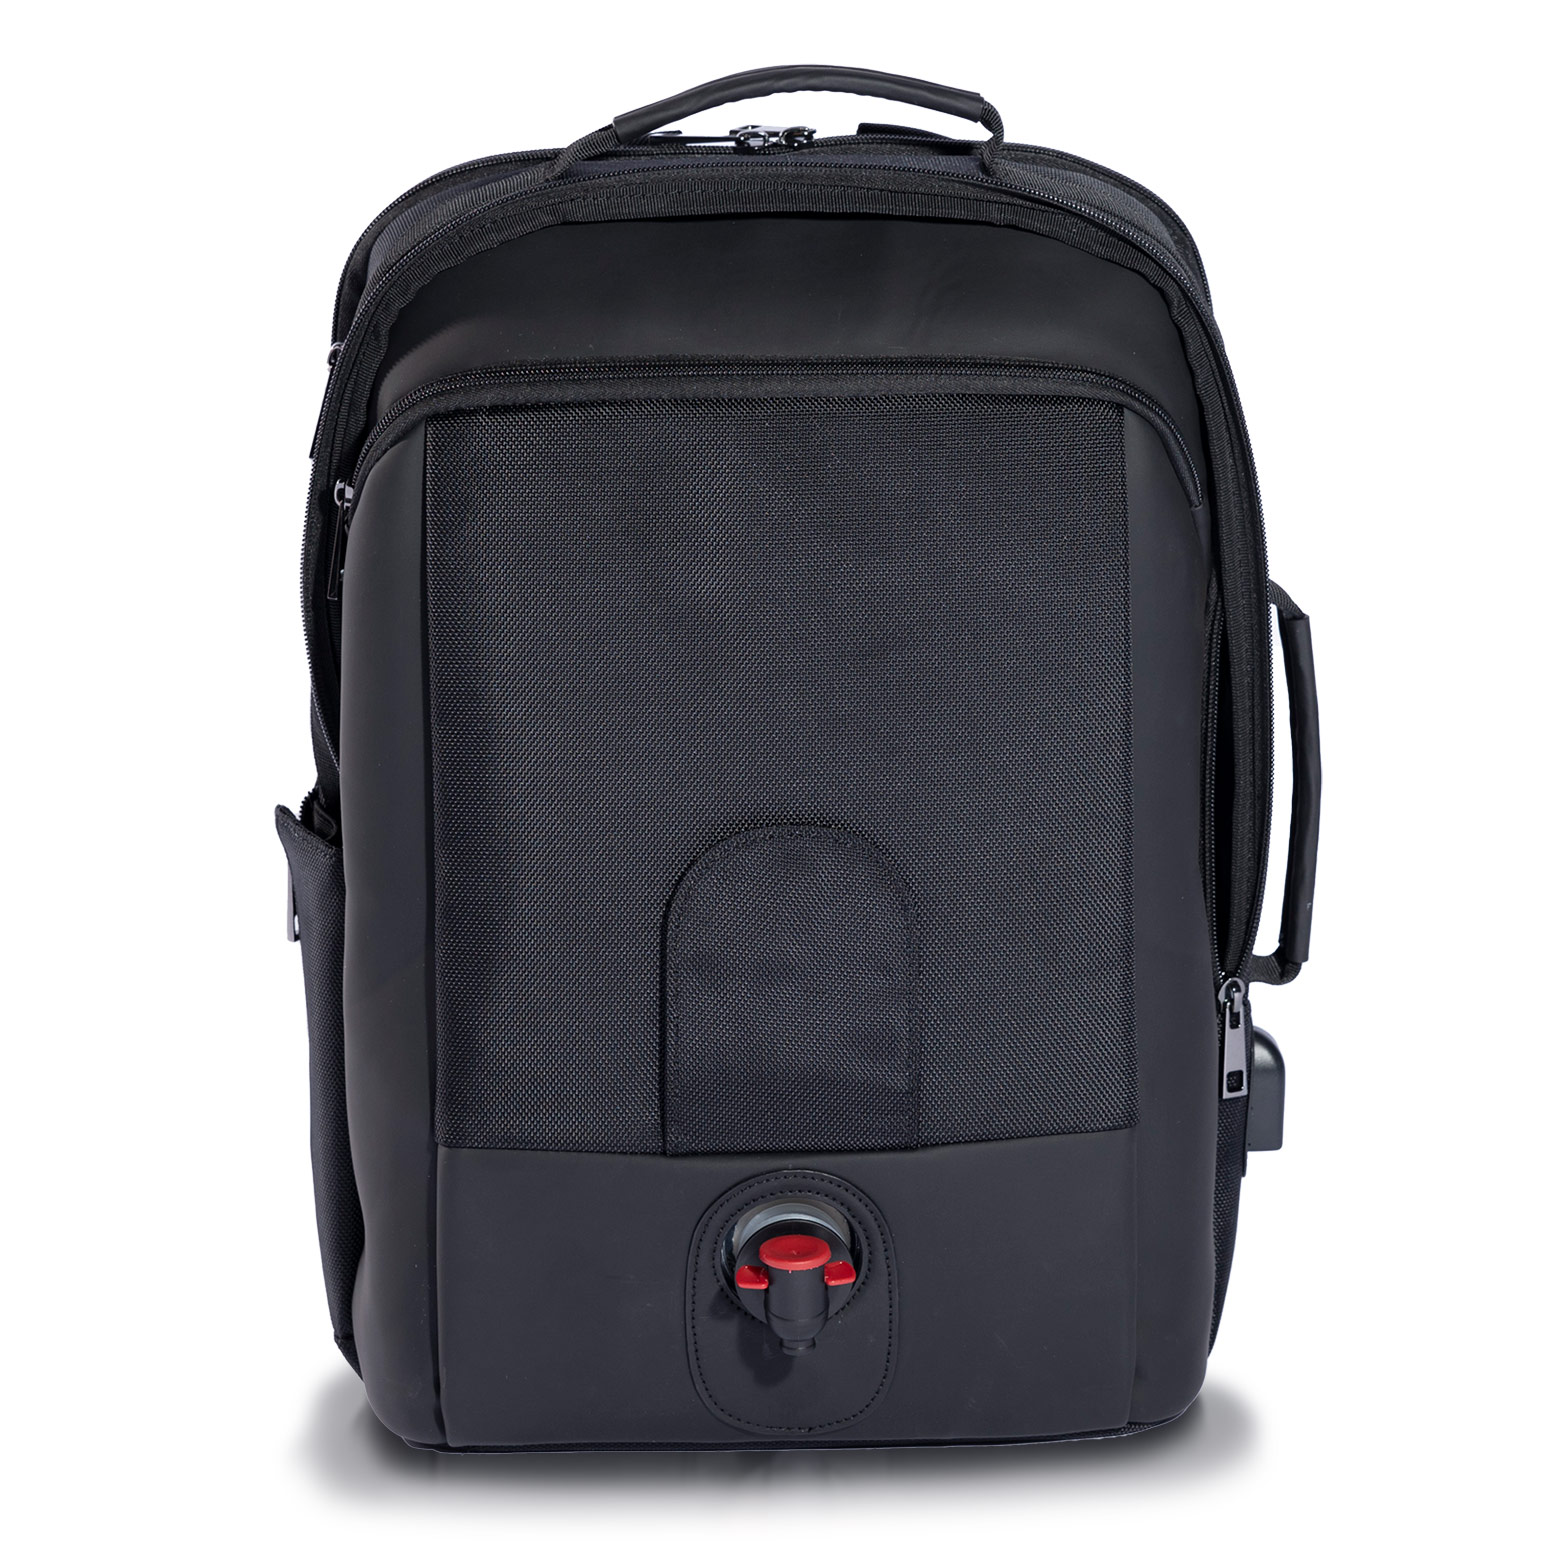 Brasswood's VineExplorer Backpack; a black backpack with a red nozzle at the base.